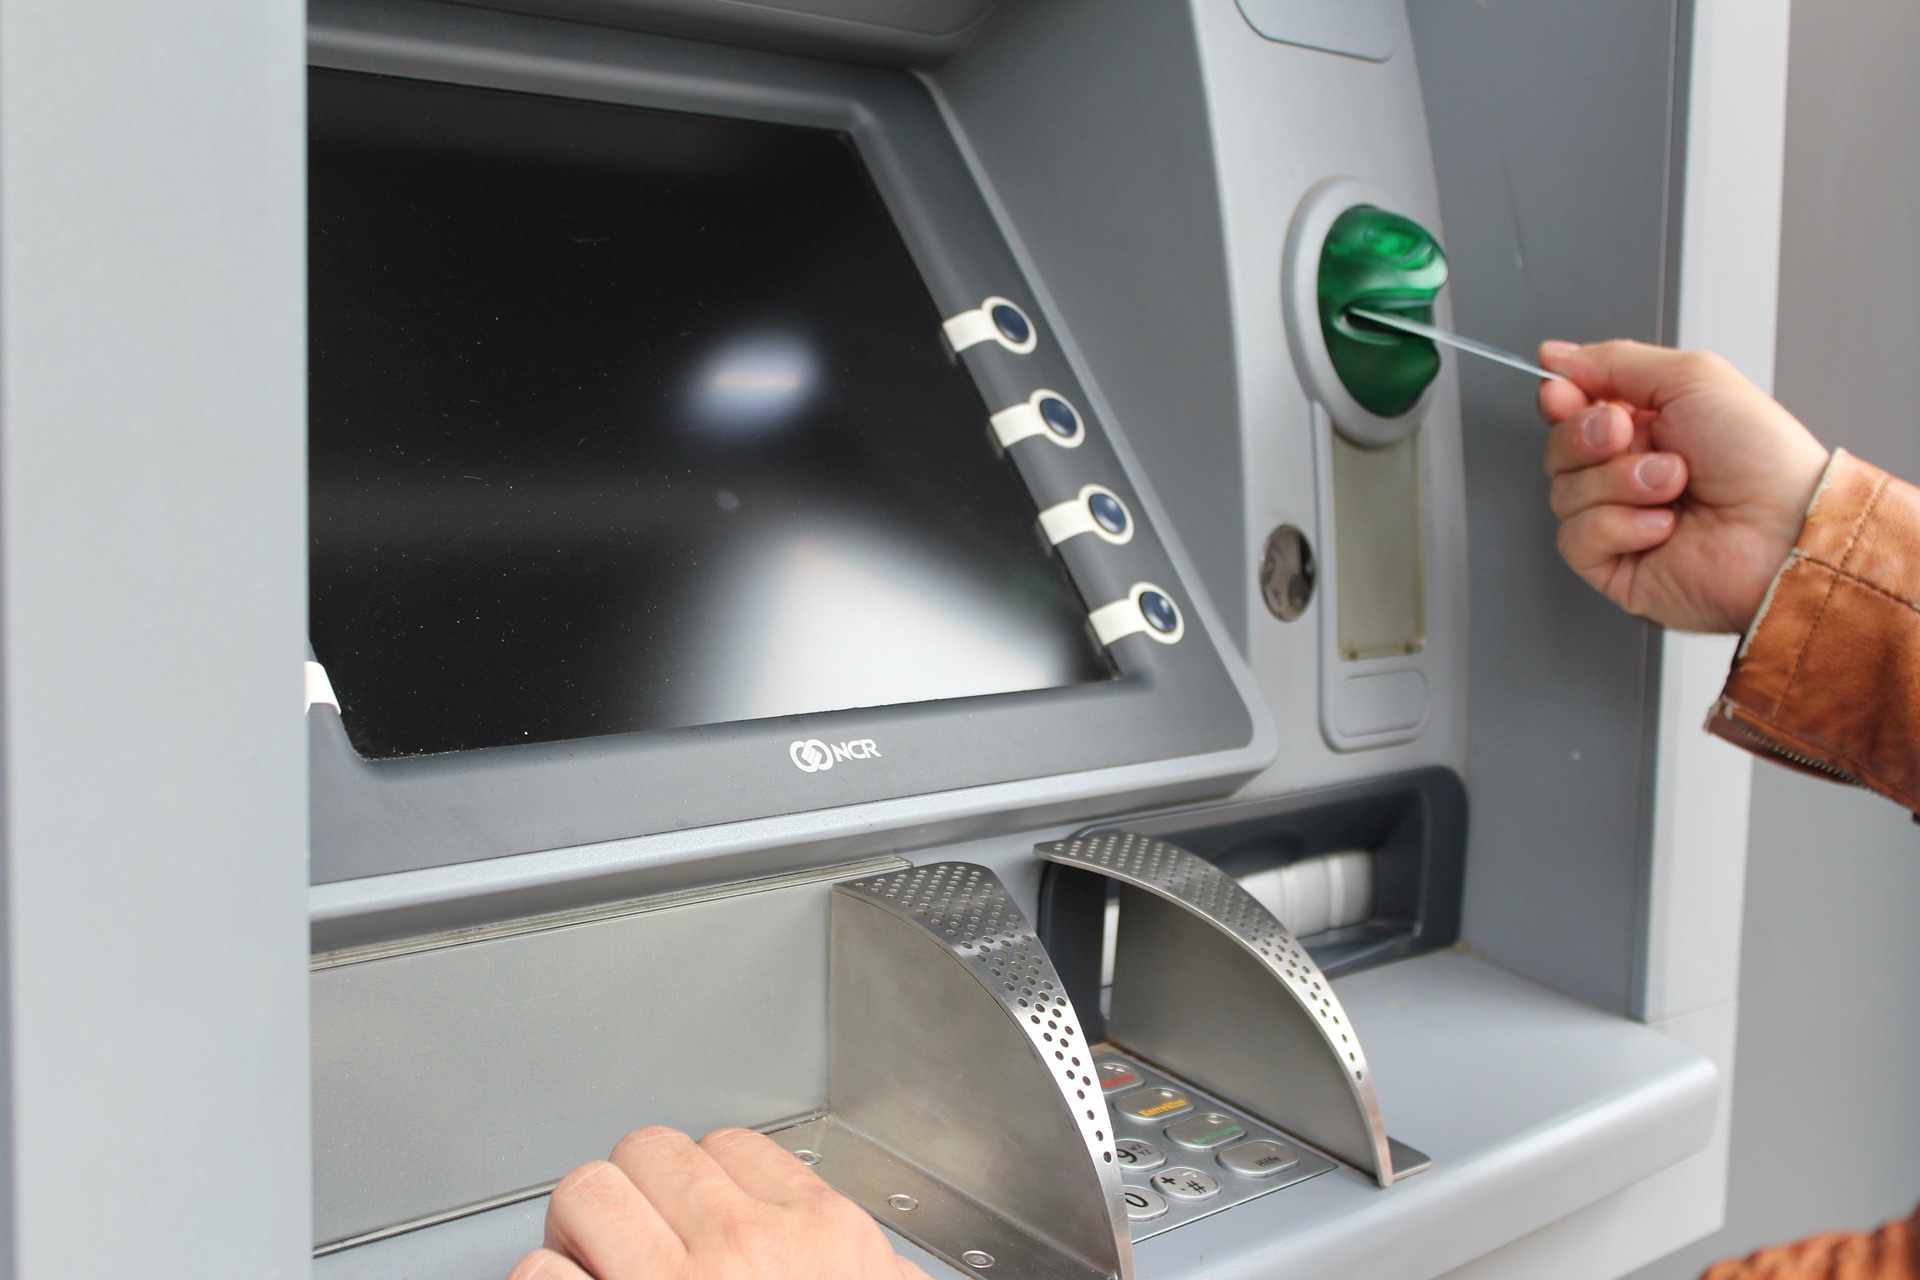 Increasing in ATM fees: Arguments of the bank and the users